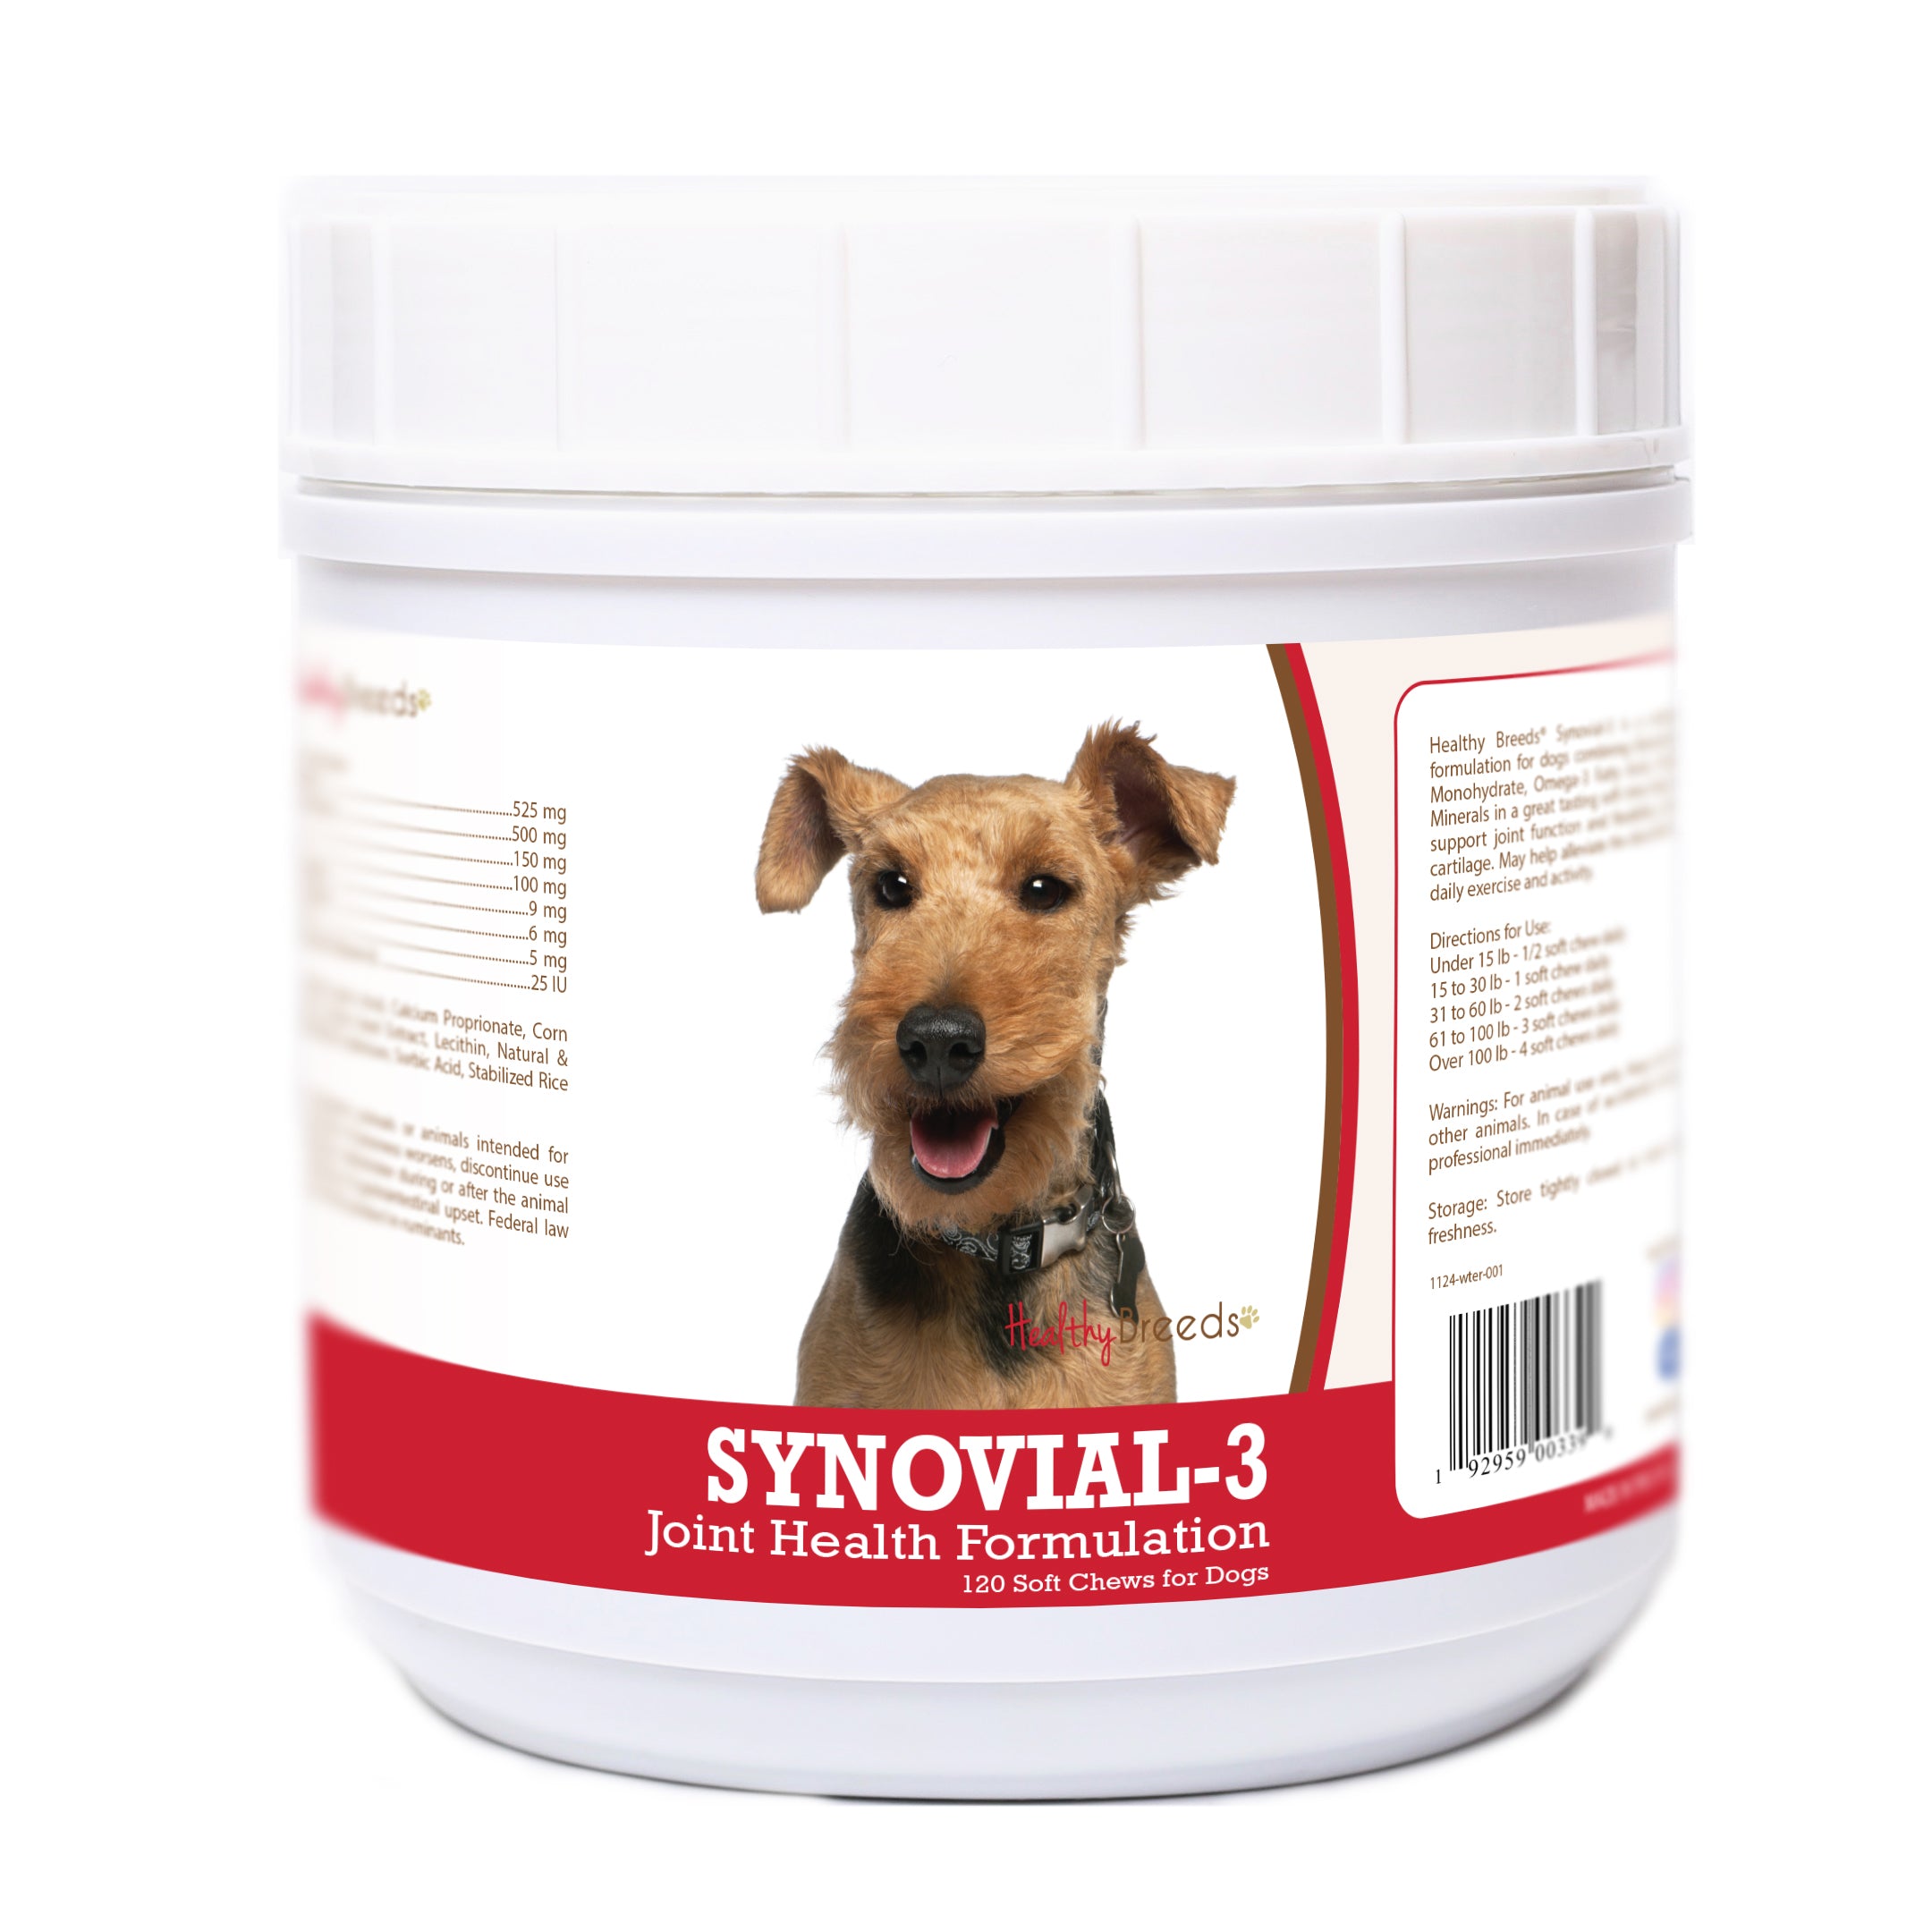 Welsh Terrier Synovial-3 Joint Health Formulation Soft Chews 120 Count